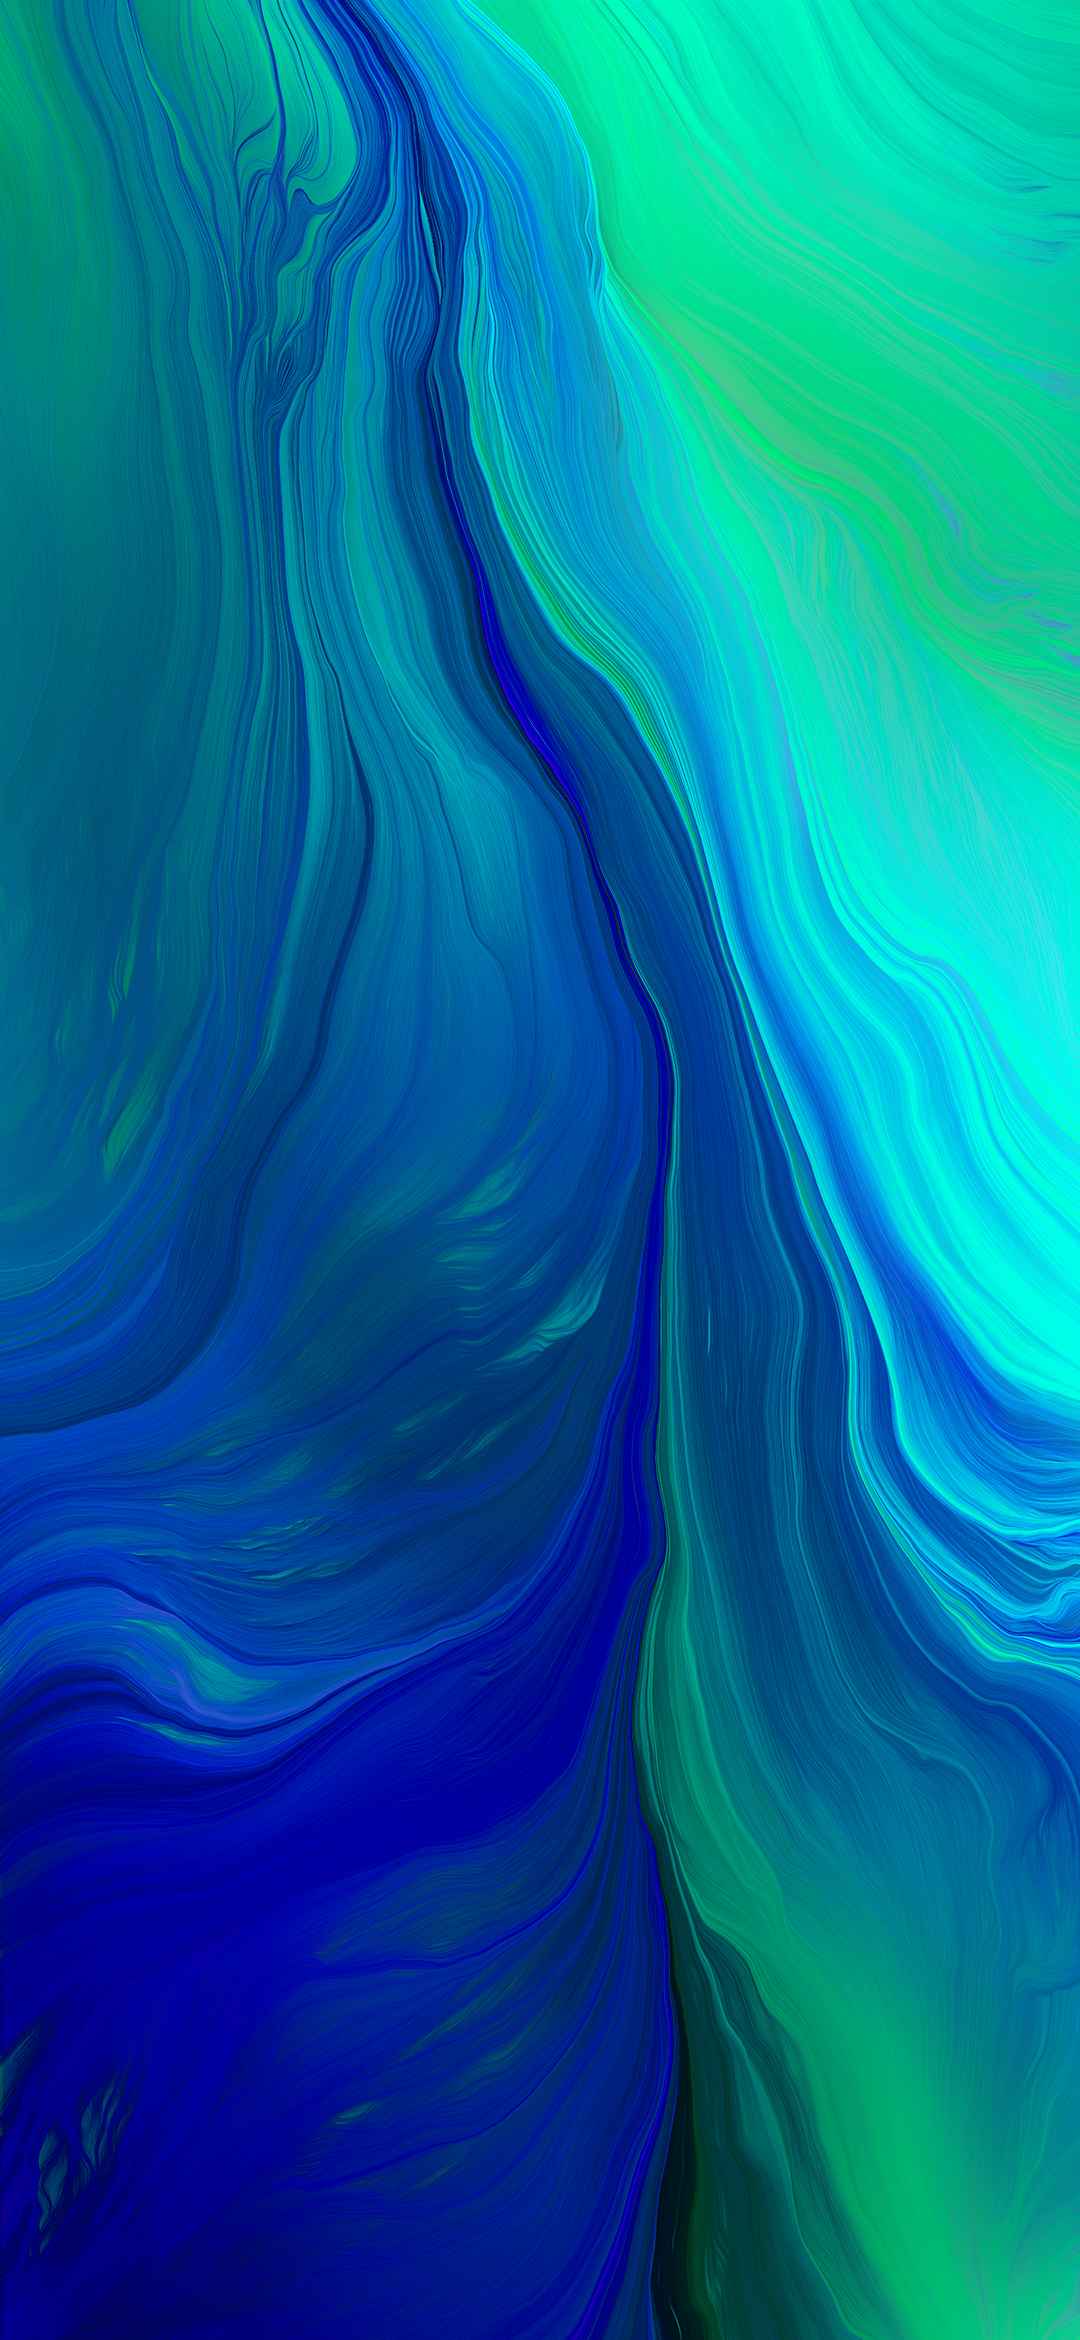 Wallpaper 3d Android Oppo Image Num 28